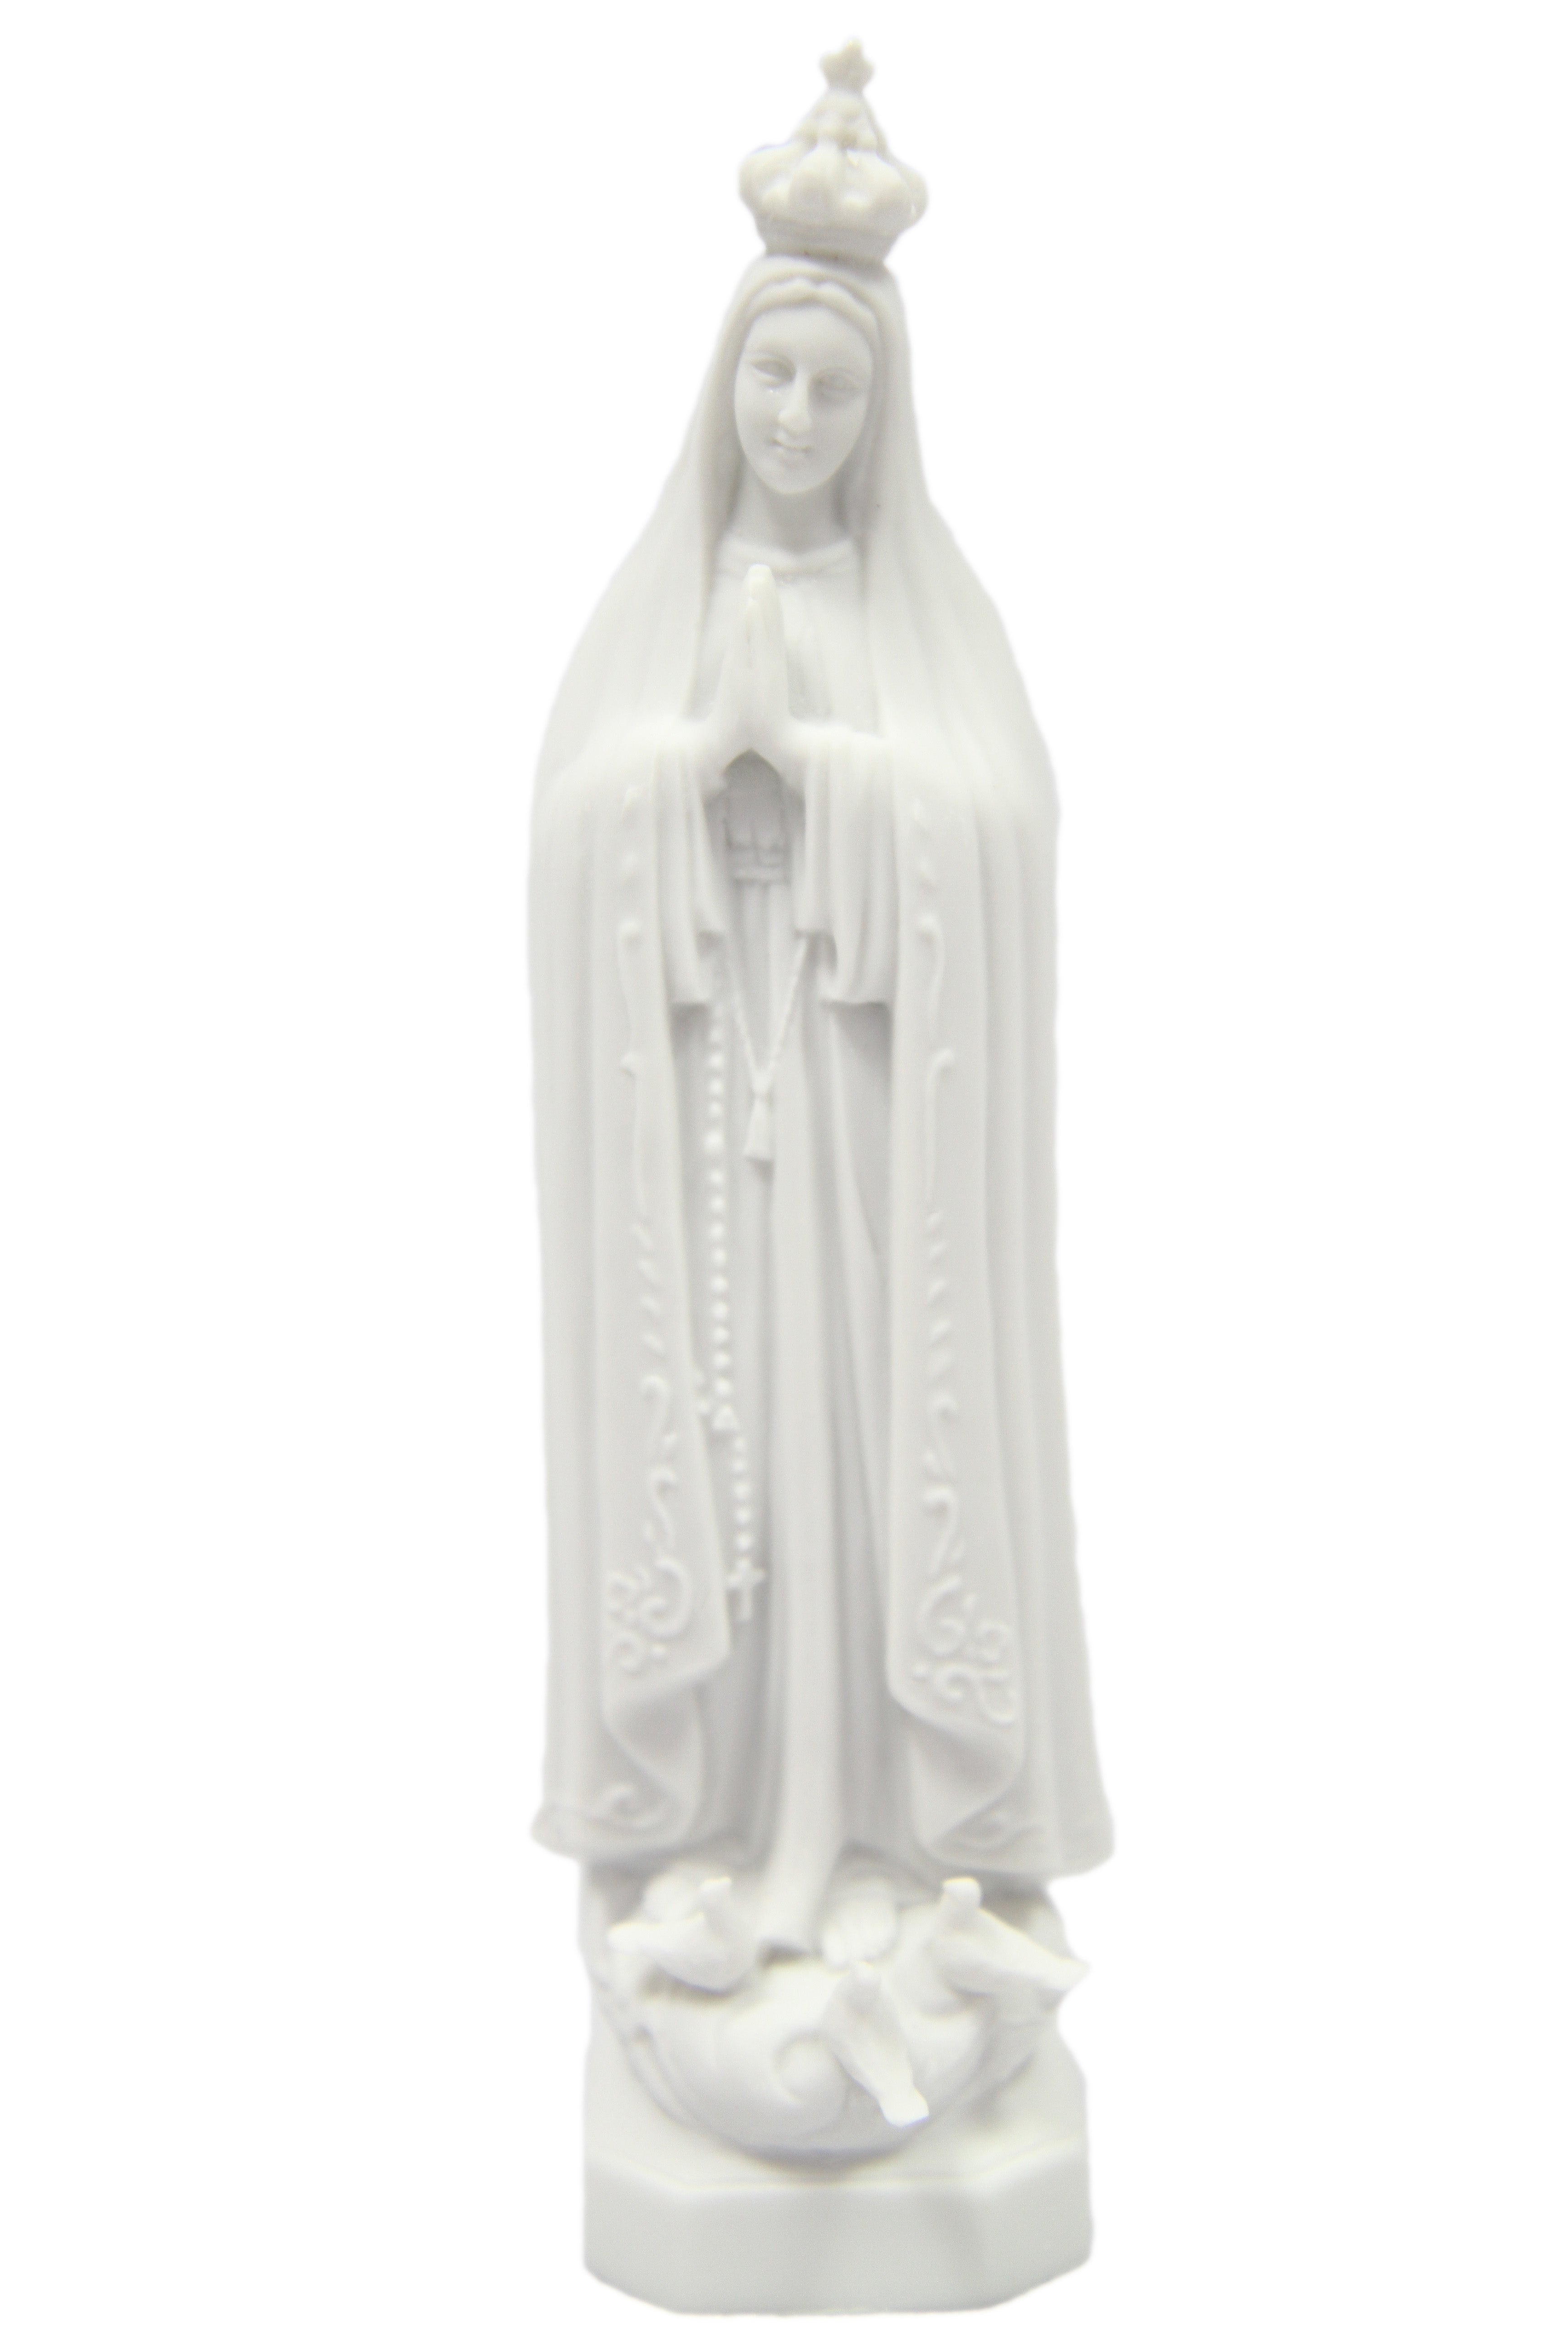 6.5 Inch Our Lady of Fatima Virgin Mary Catholic Statue Vittoria Collection Made in Italy